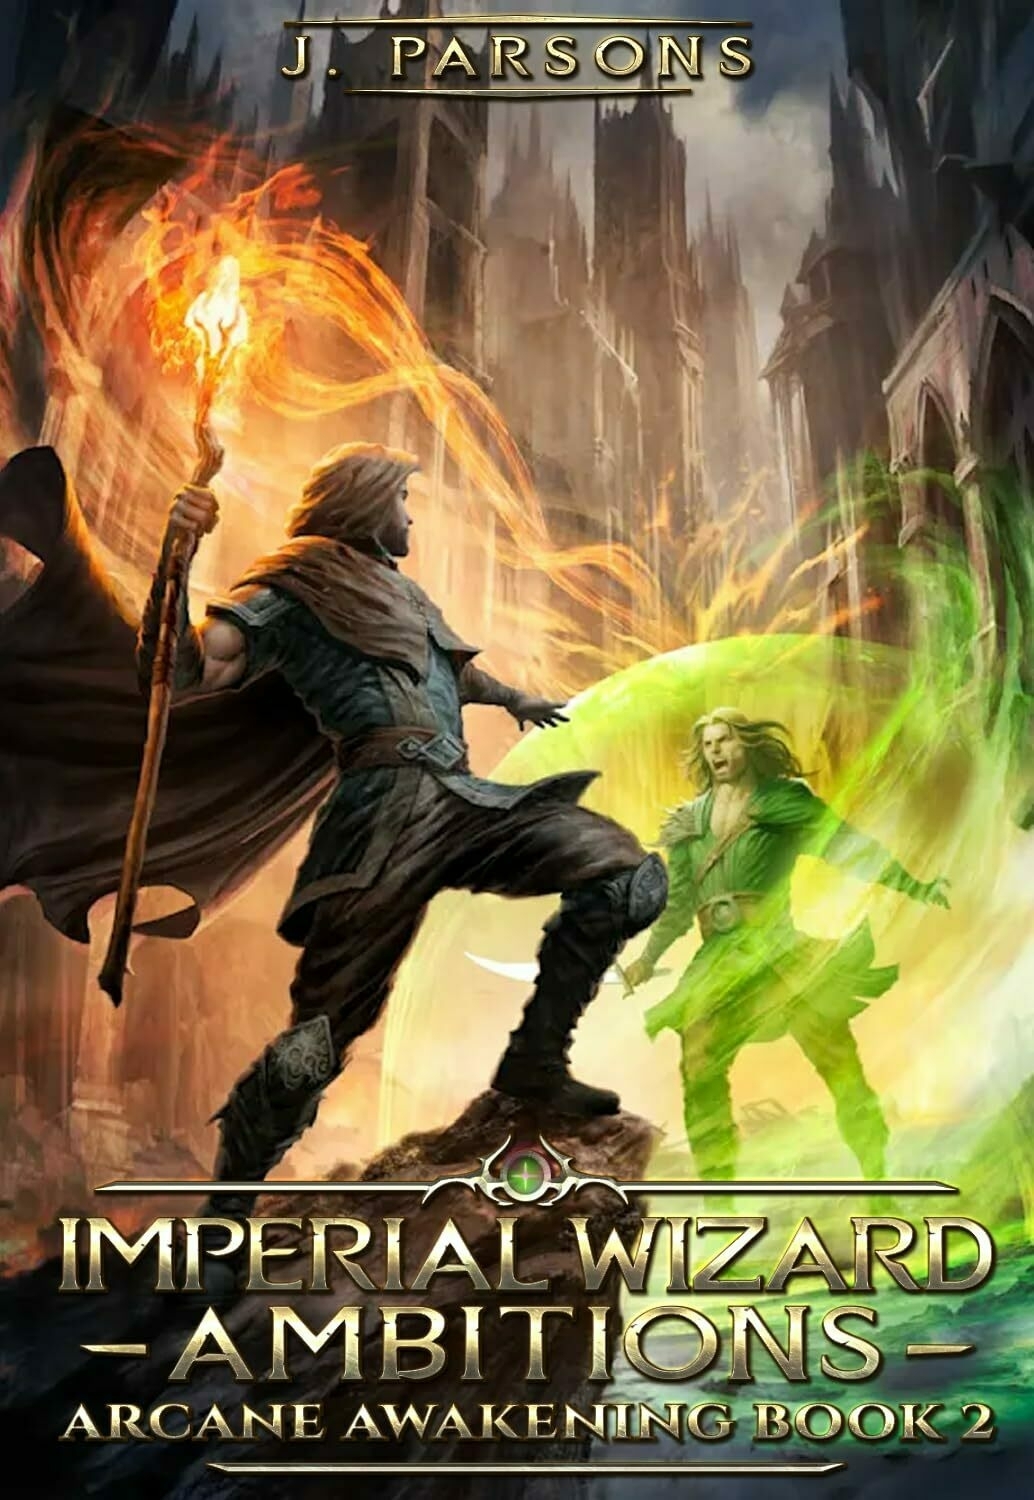 Cover art for Imperial Wizard: Ambitions